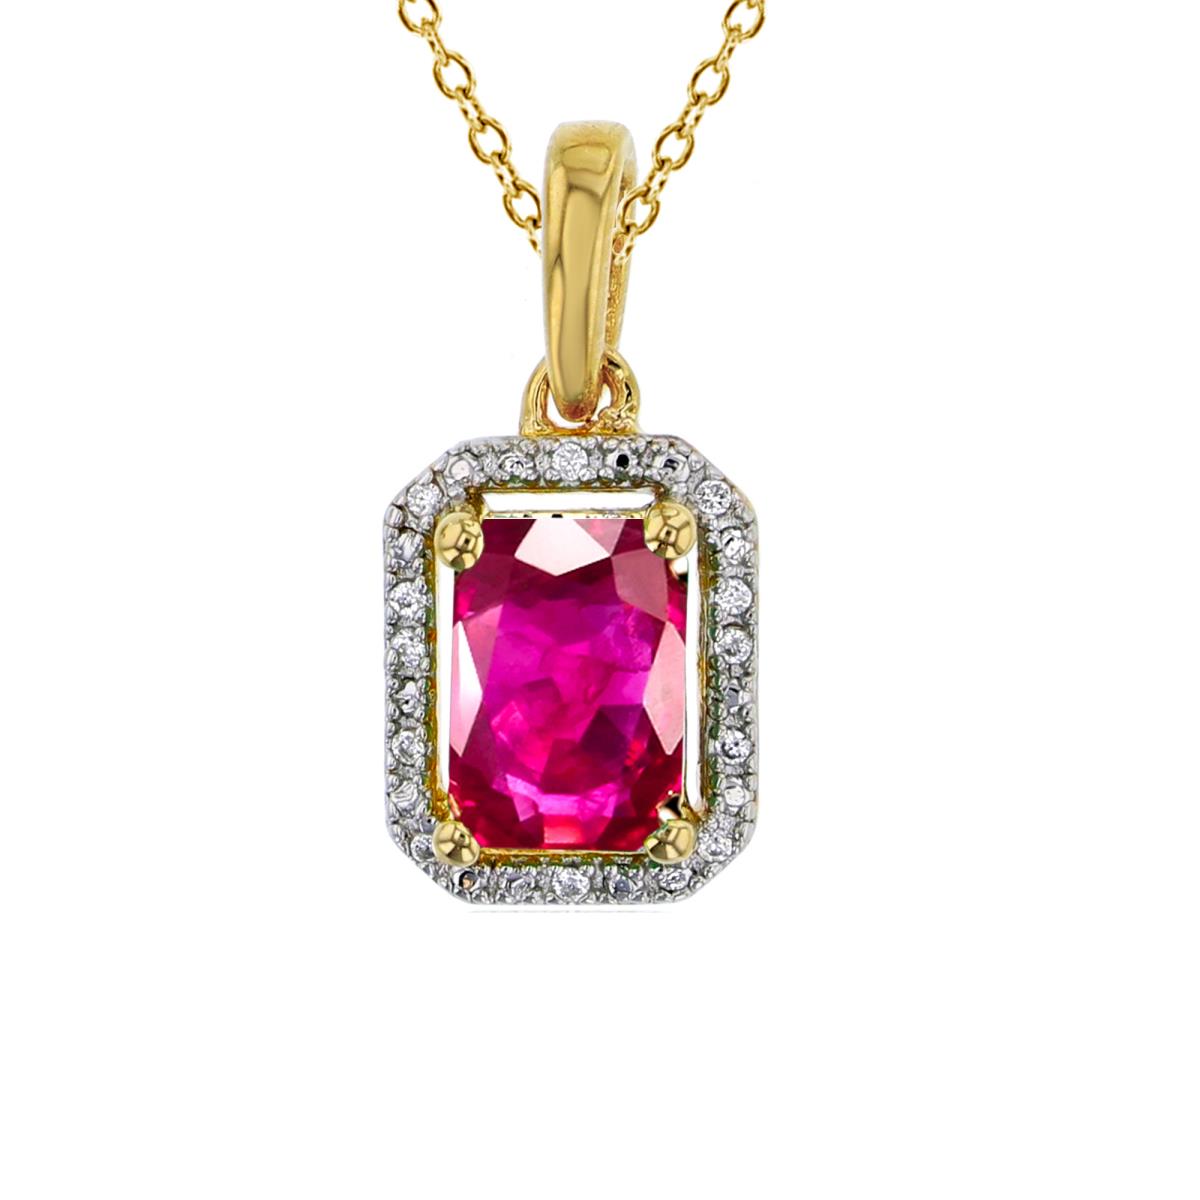 10K Yellow Gold 0.01cttw Rnd Diamonds & 7x5mm Oct Glass Filled Ruby Cushion 18"Necklace